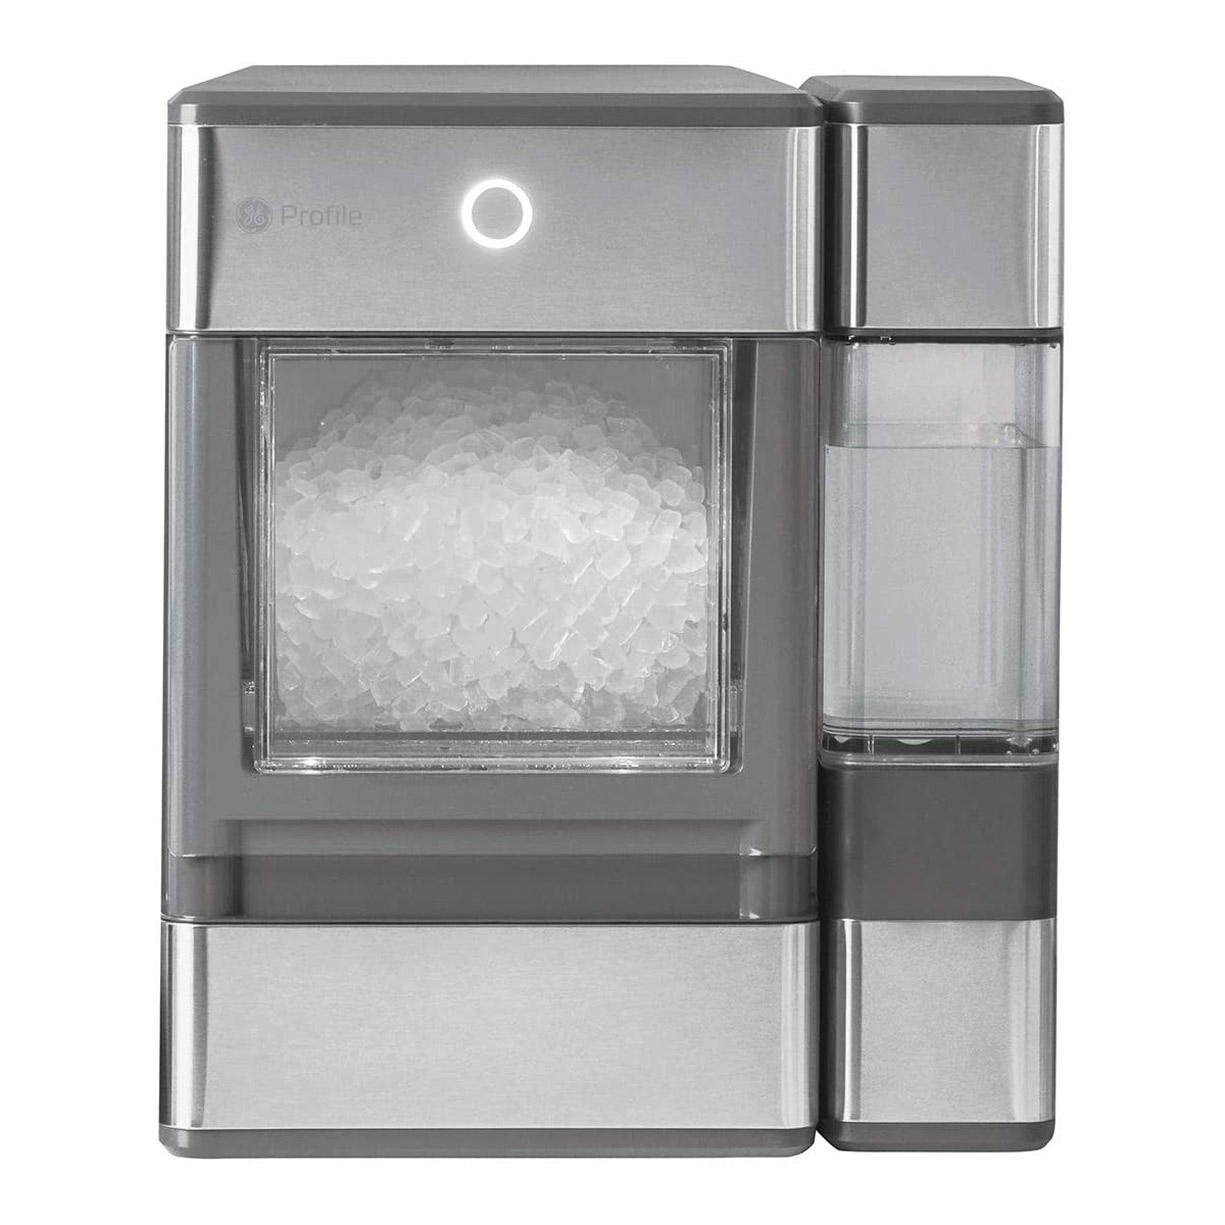 Opal Nugget Ice Maker - Makes Soft Yet Crunchy Chewable Ice Cubes | The